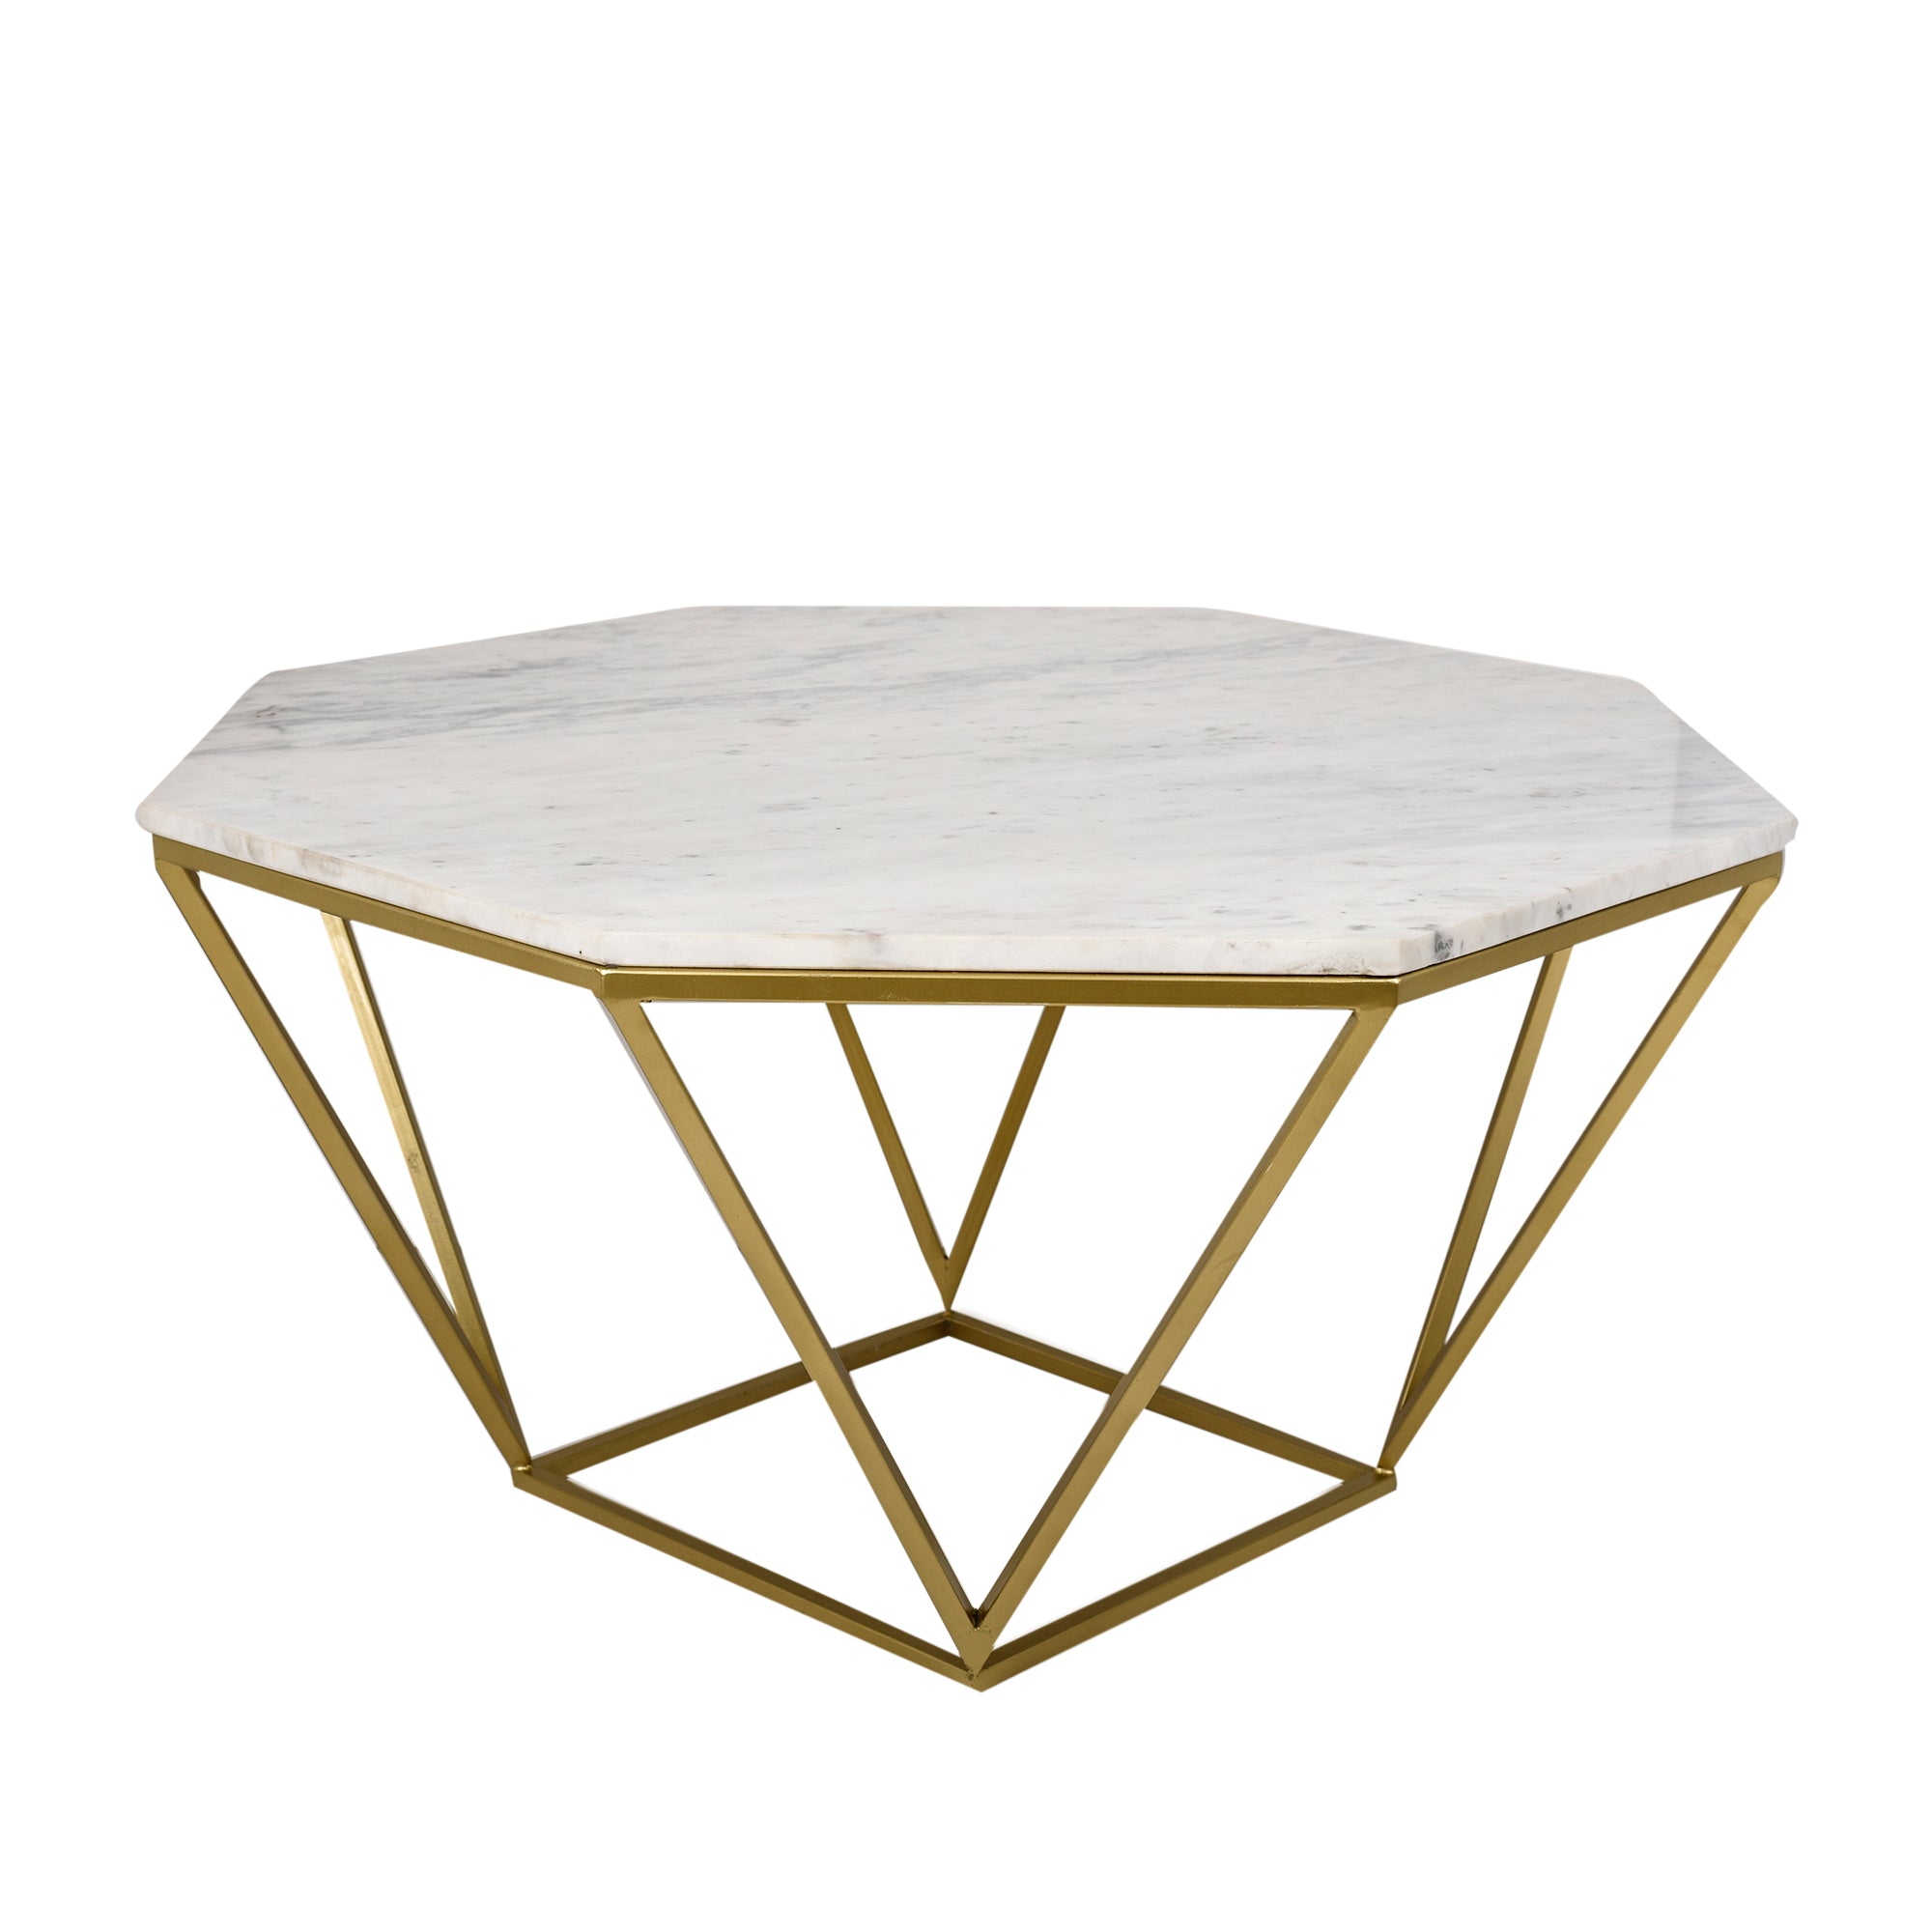 Signum Marble Hexagon Shaped Coffee Table 31 inches